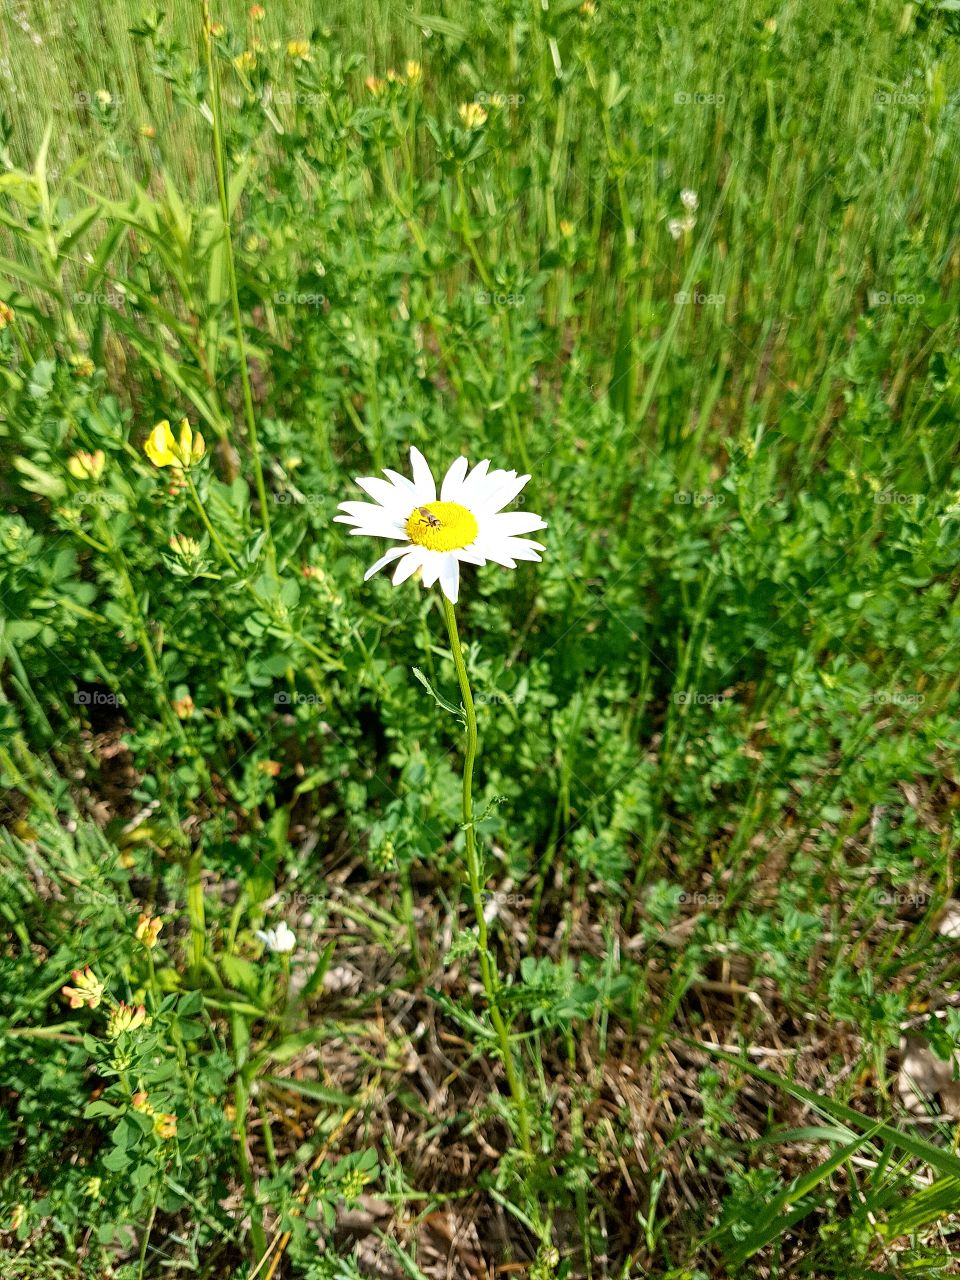 A single daisy with an ant on its centre.